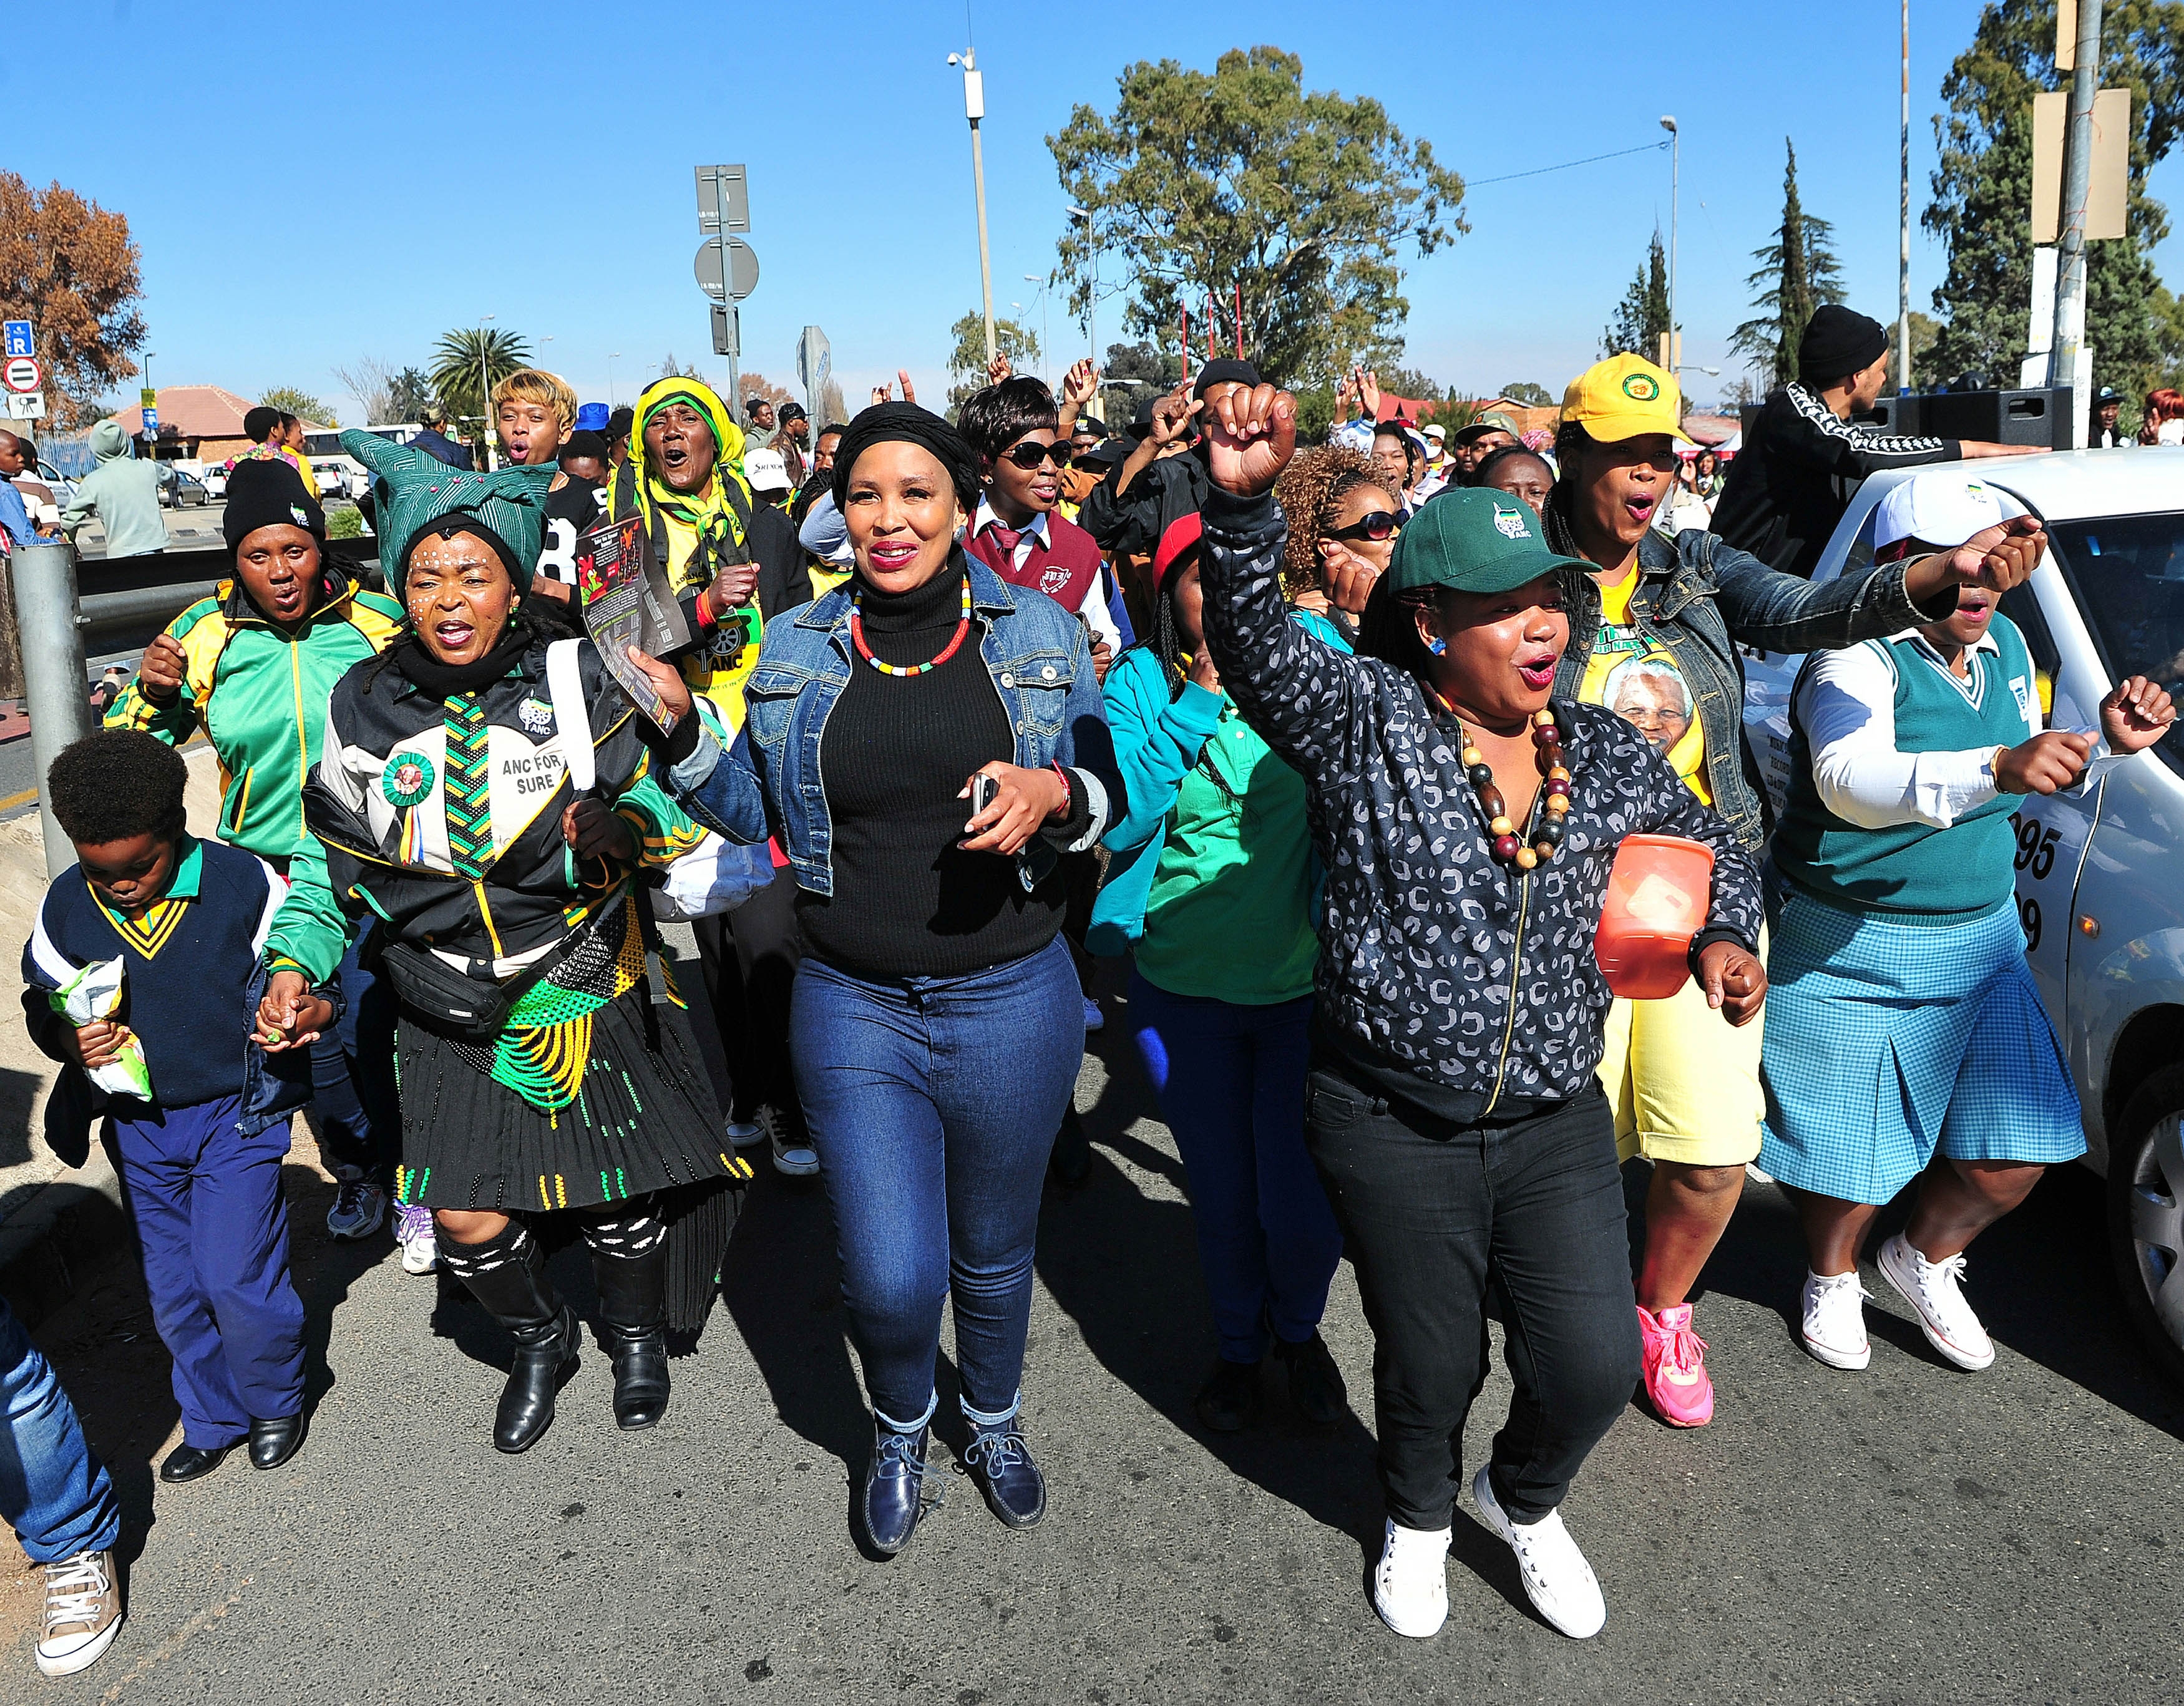 SOWETO, SOUTH AFRICA  JUNE 16: People march to the national commemoration of the 40th anniversary for the June 16, 1976 uprising at Orlando Stadium on June 16, 2016 in Johannesburg, South Africa. Speaking at the event, President Jacob Zuma appealed to young people to stop violent protests and the looting of infrastructure. (Photo by Gallo Images / Sowetan / Veli Nhlapho)